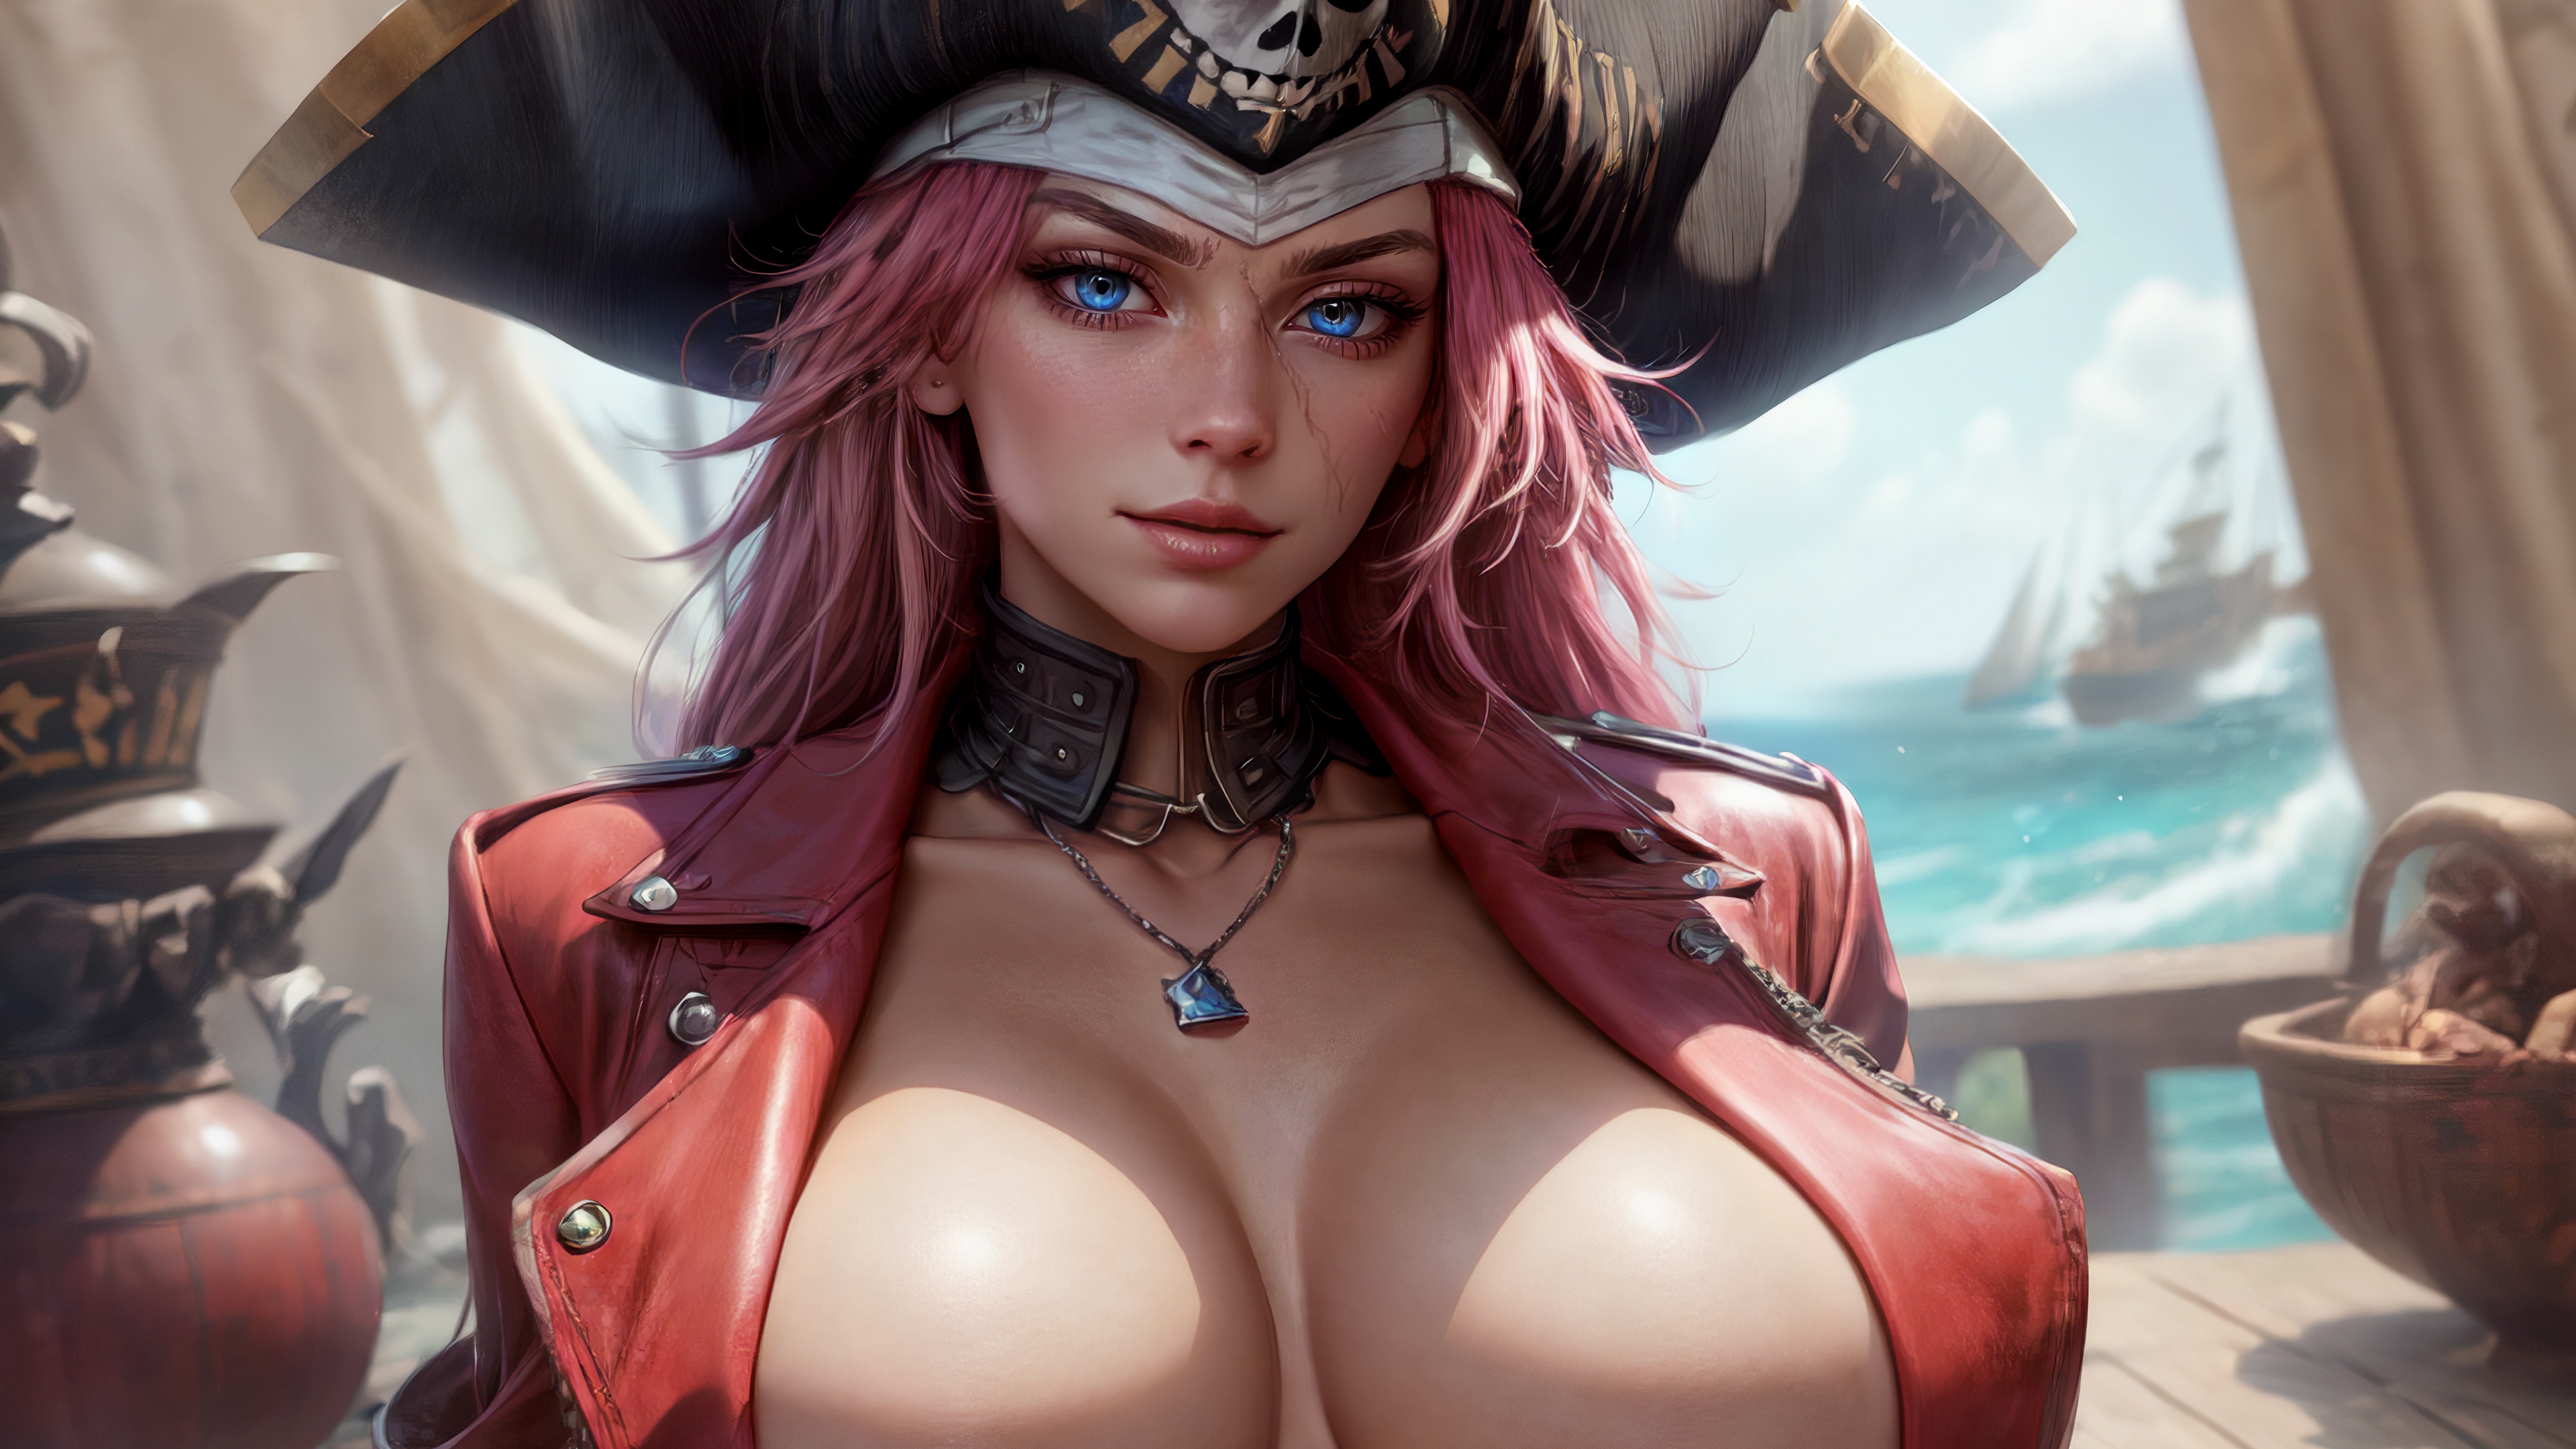 The hot pirate captain